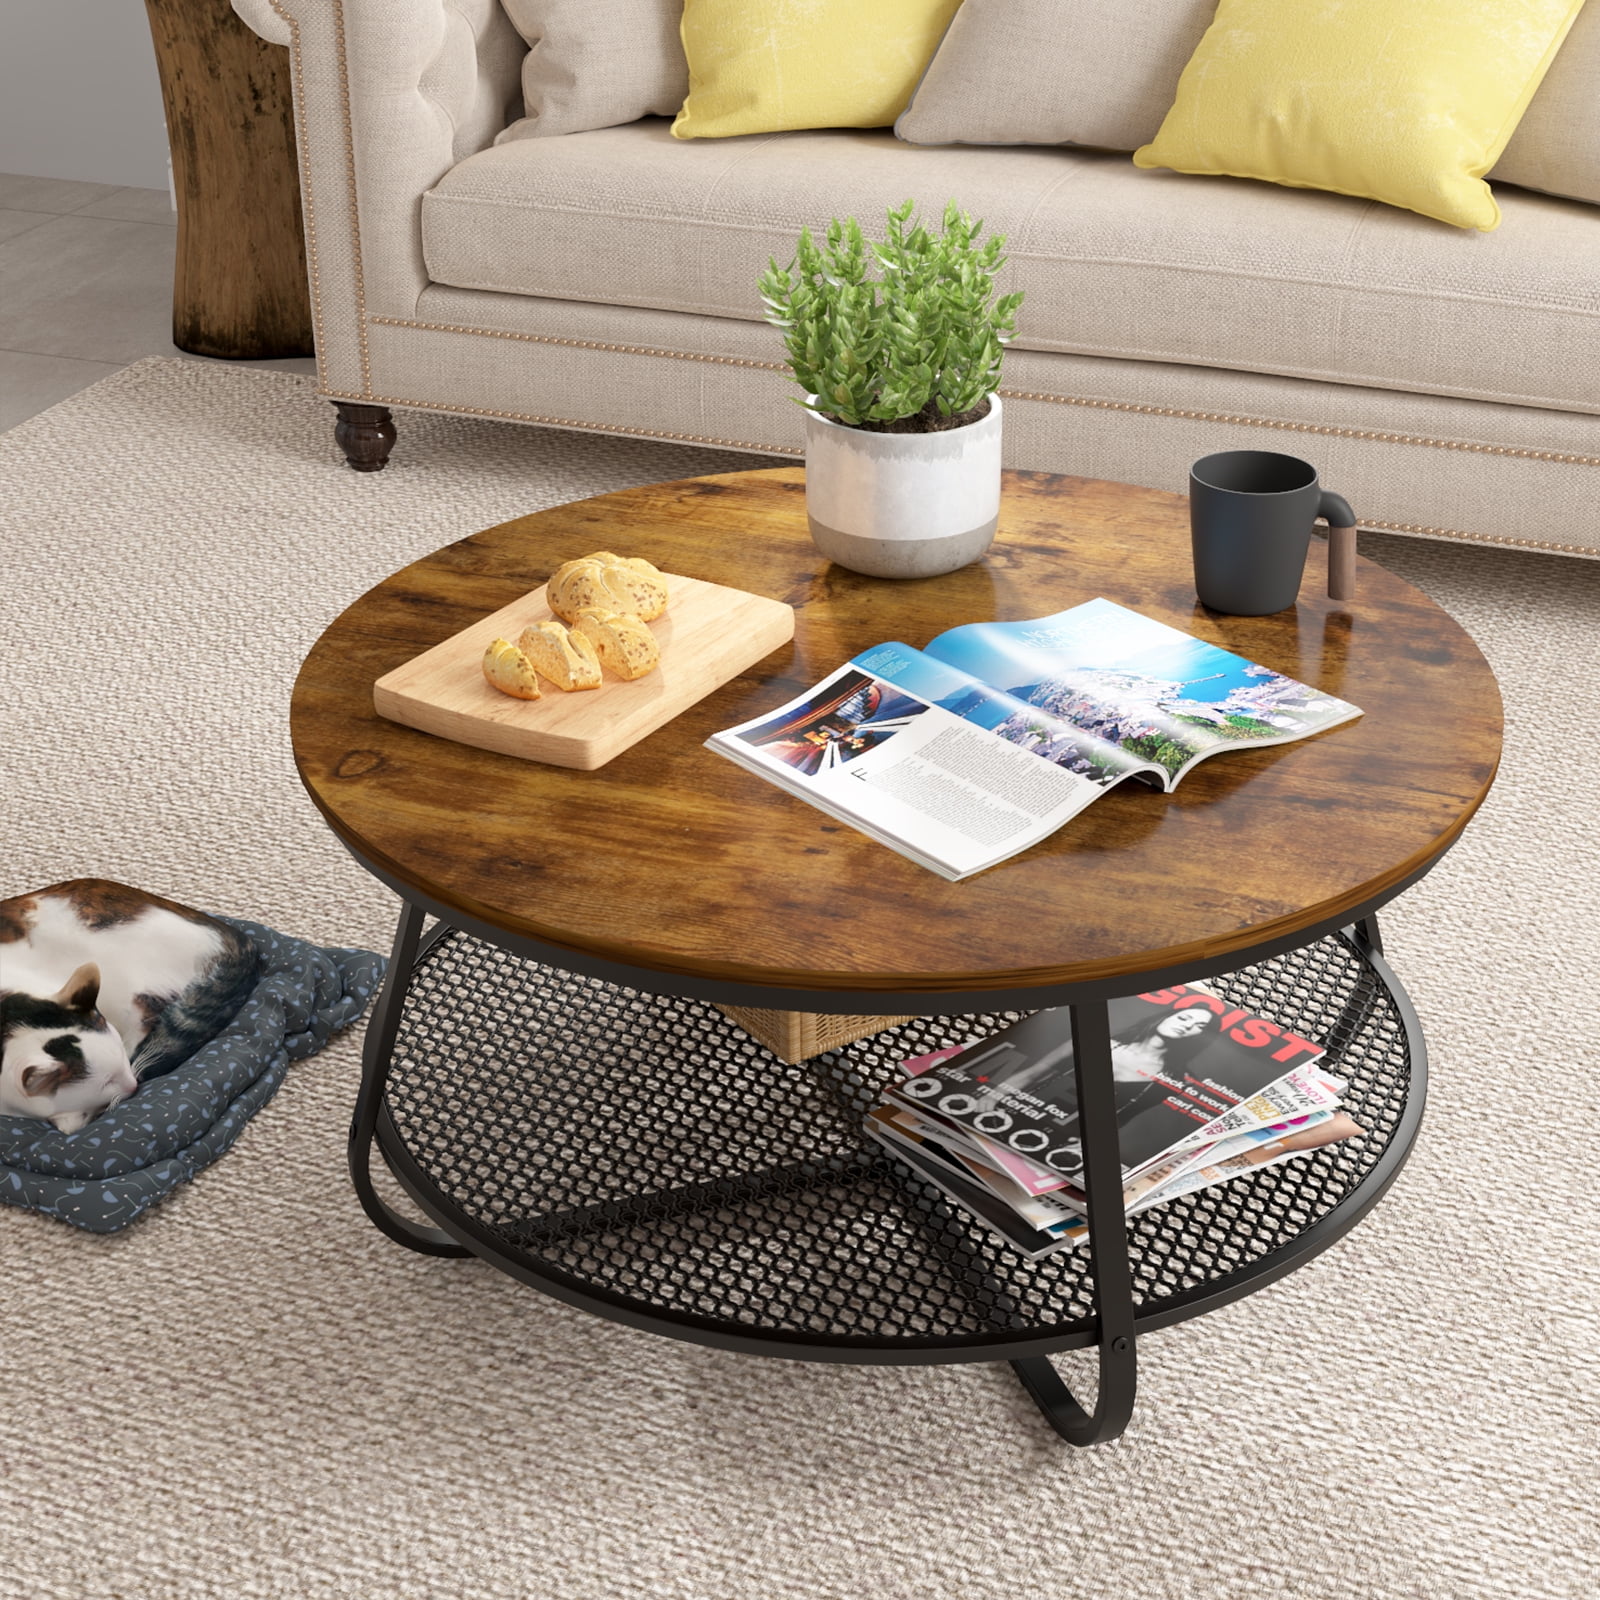 Modern coffee table Side table Round coffee table Sofa table Solid walnut coffee table Rustic Coffee Table Wood coffee table